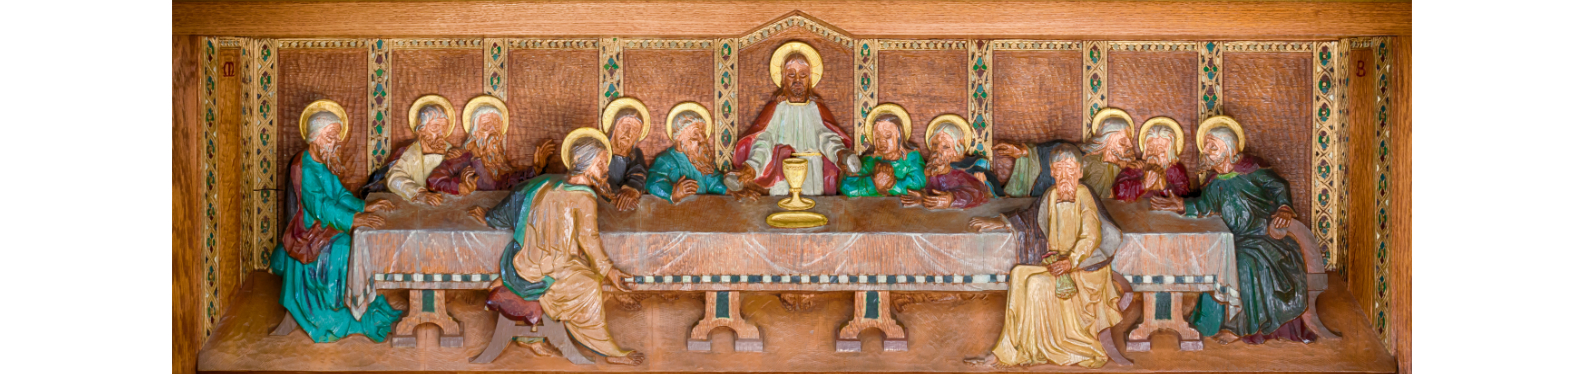 Last Supper Carving - Front of Altar